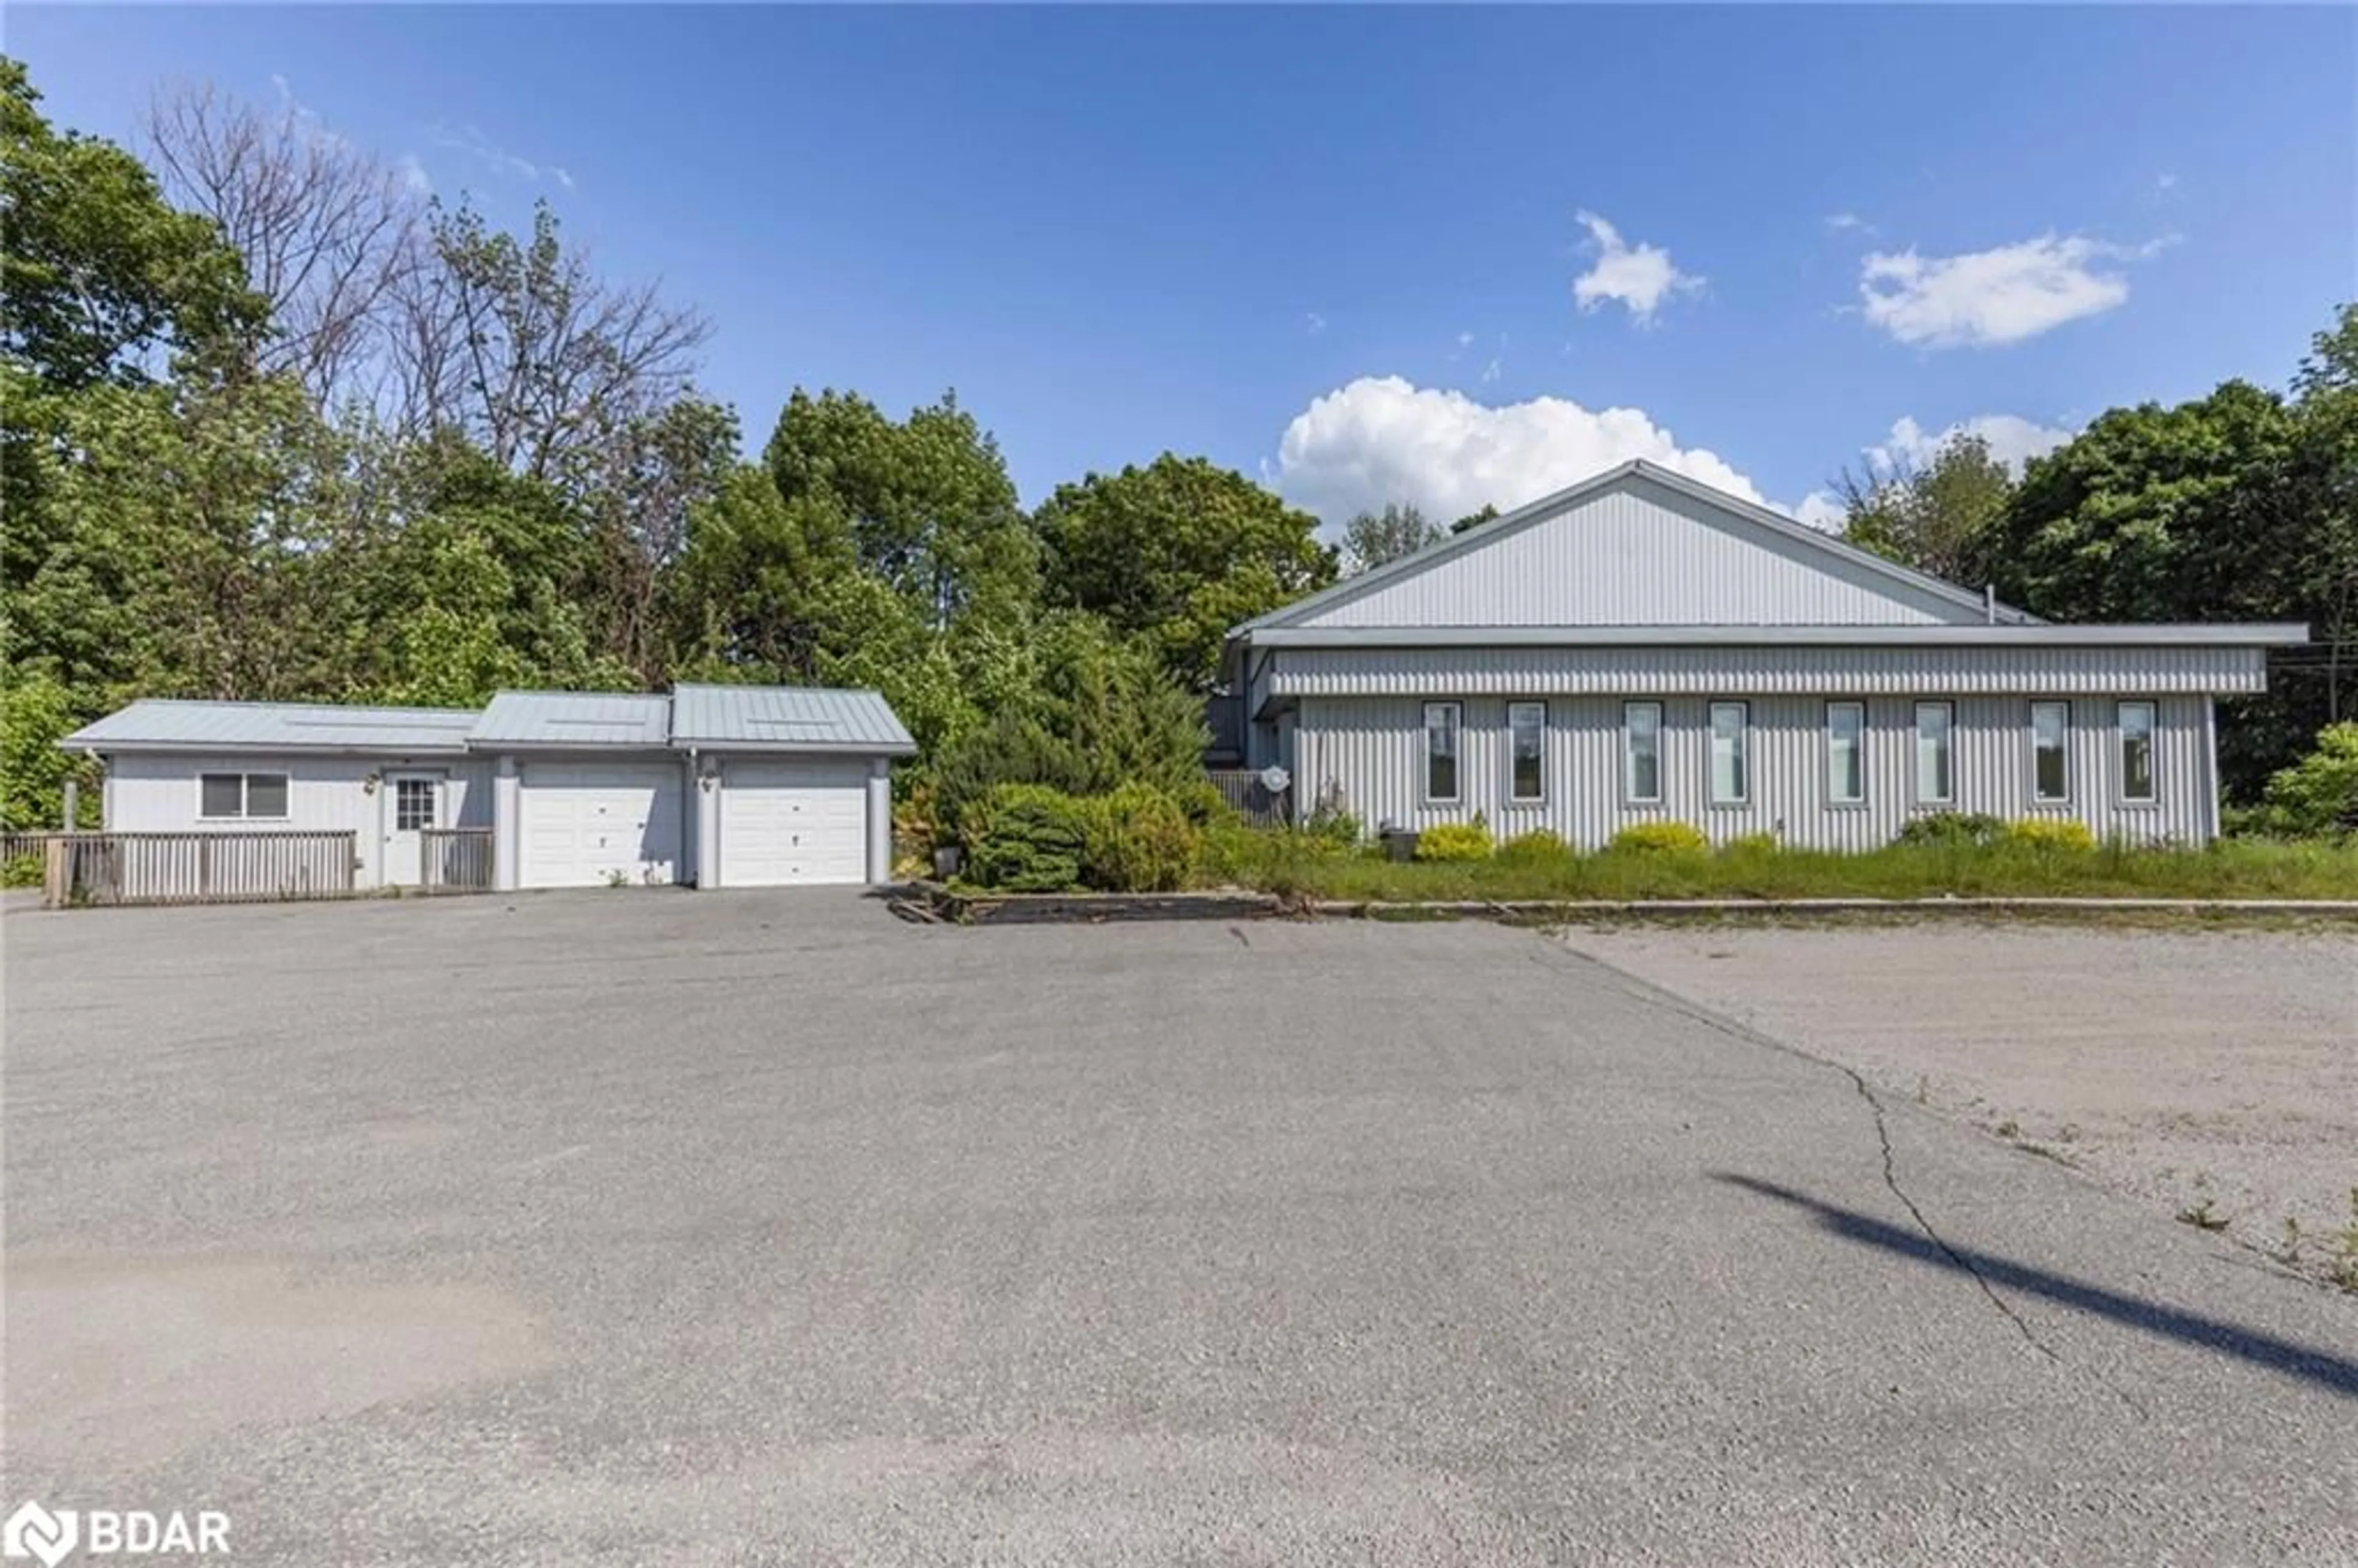 Outside view for 4201 Huronia Rd, Severn Ontario L3V 6H3